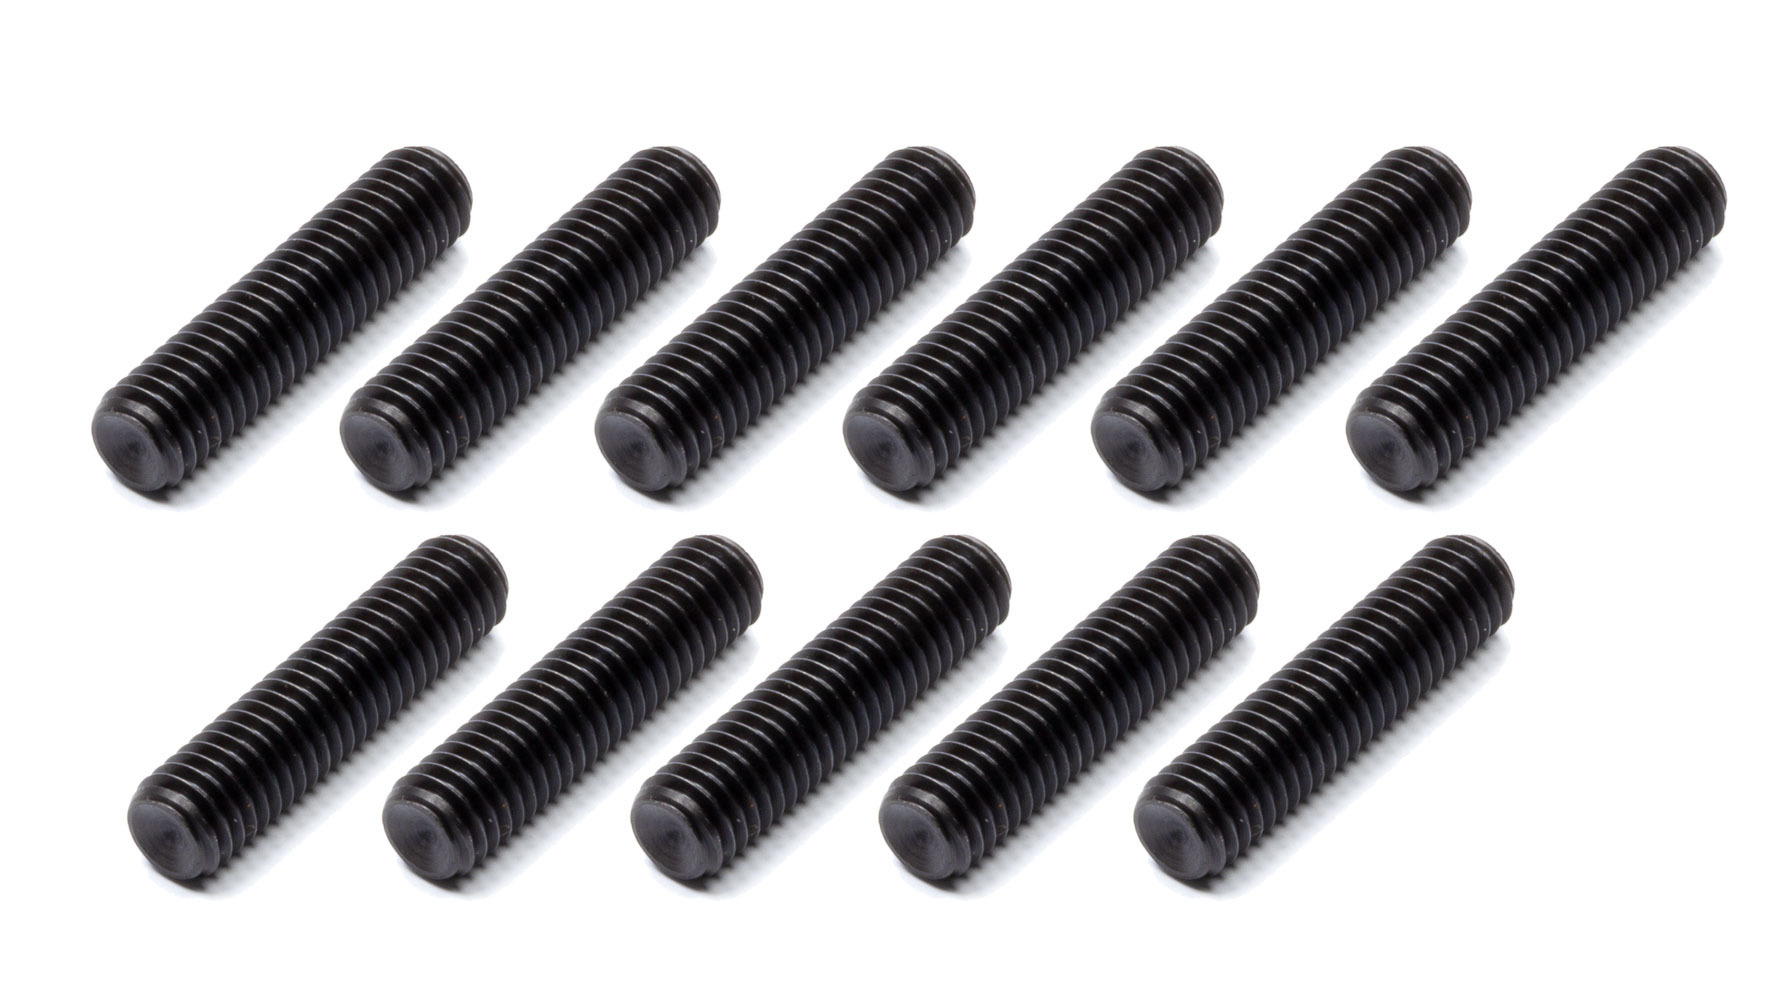 Tiger Quick Change 2306 Gear Cover Stud, 3/8-16 in Thread, 1-1/2 in Long, Steel, Black Oxide, Tiger Quick Change, Set of 10